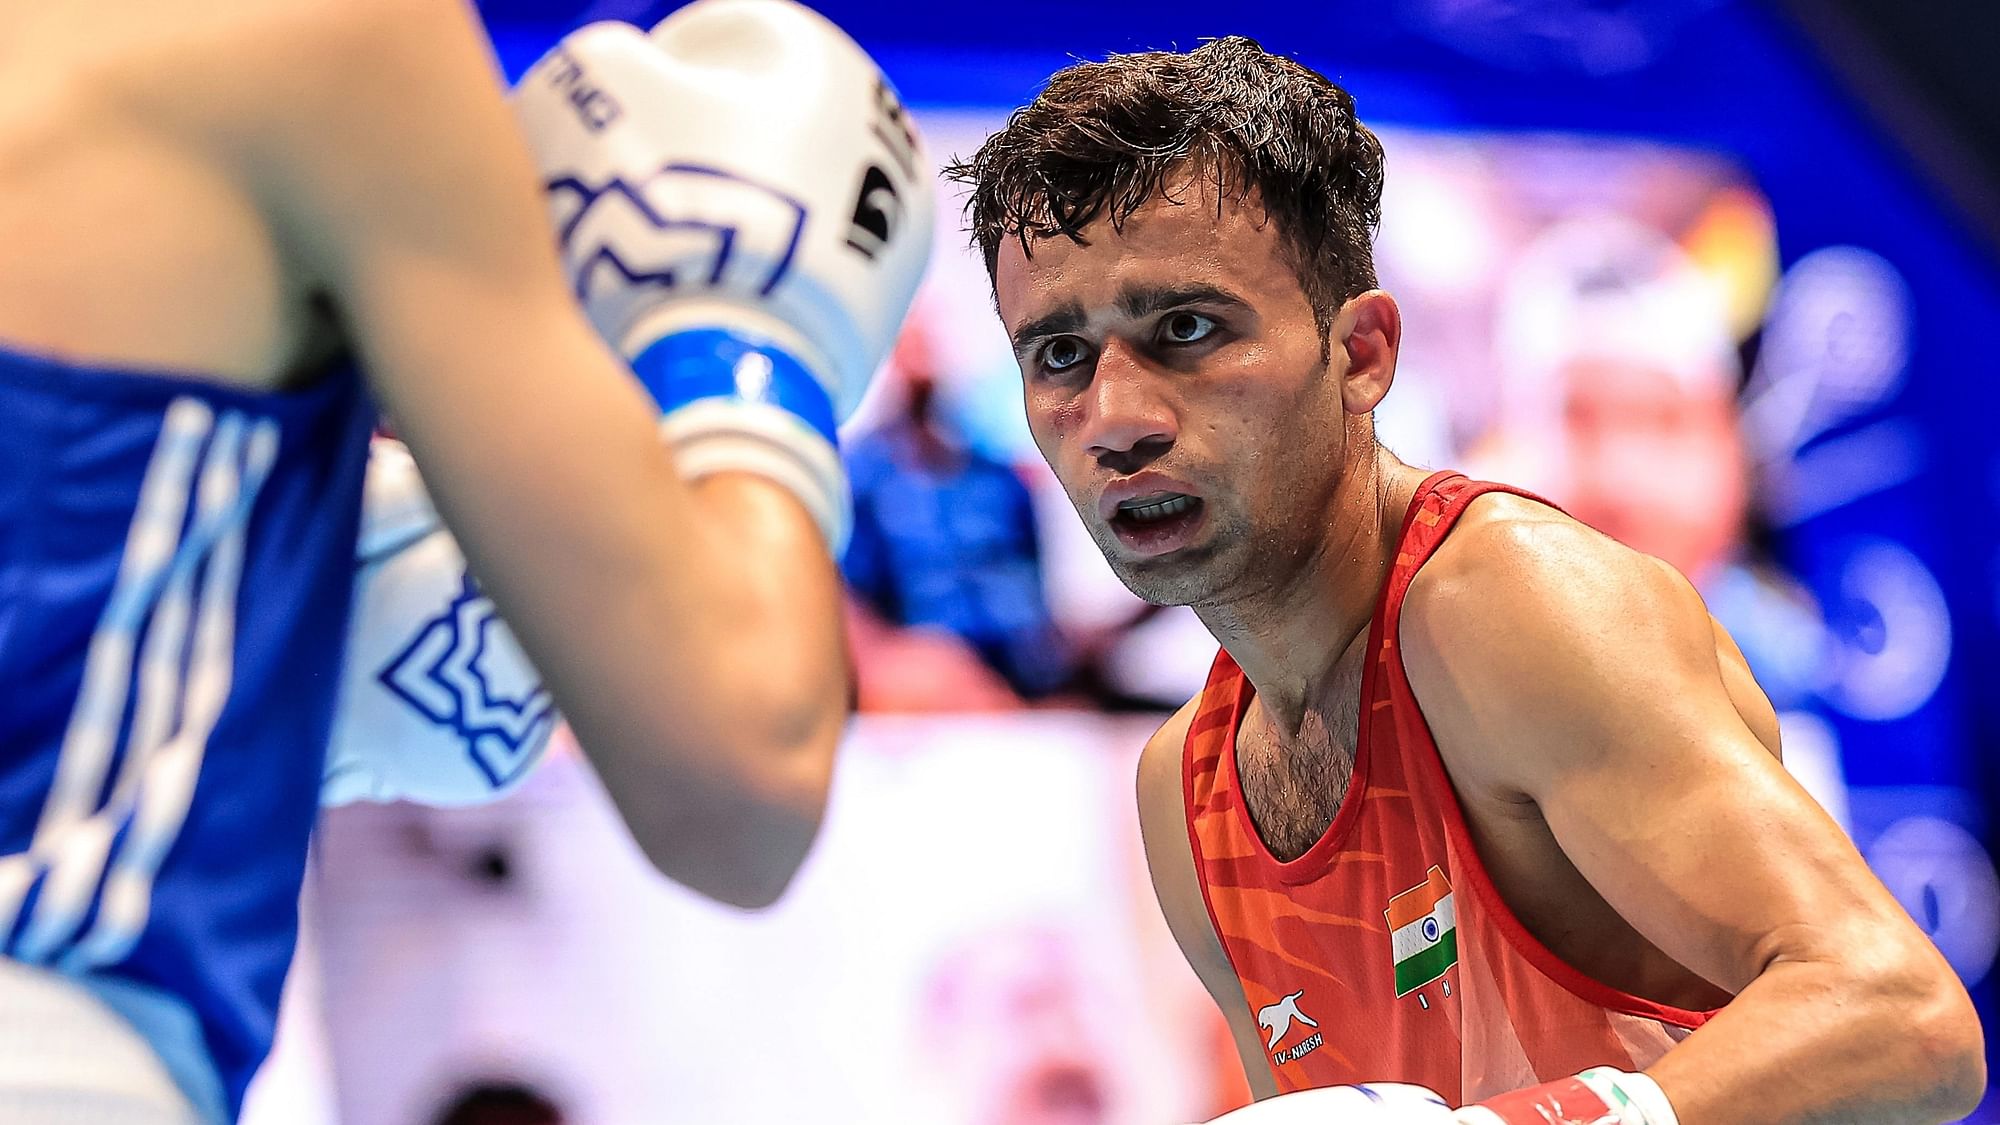 <div class="paragraphs"><p>Deepak Kumar lost his bout to&nbsp;Billal Bennama of France 3-4 on points, after the bout was reviewed.</p></div>